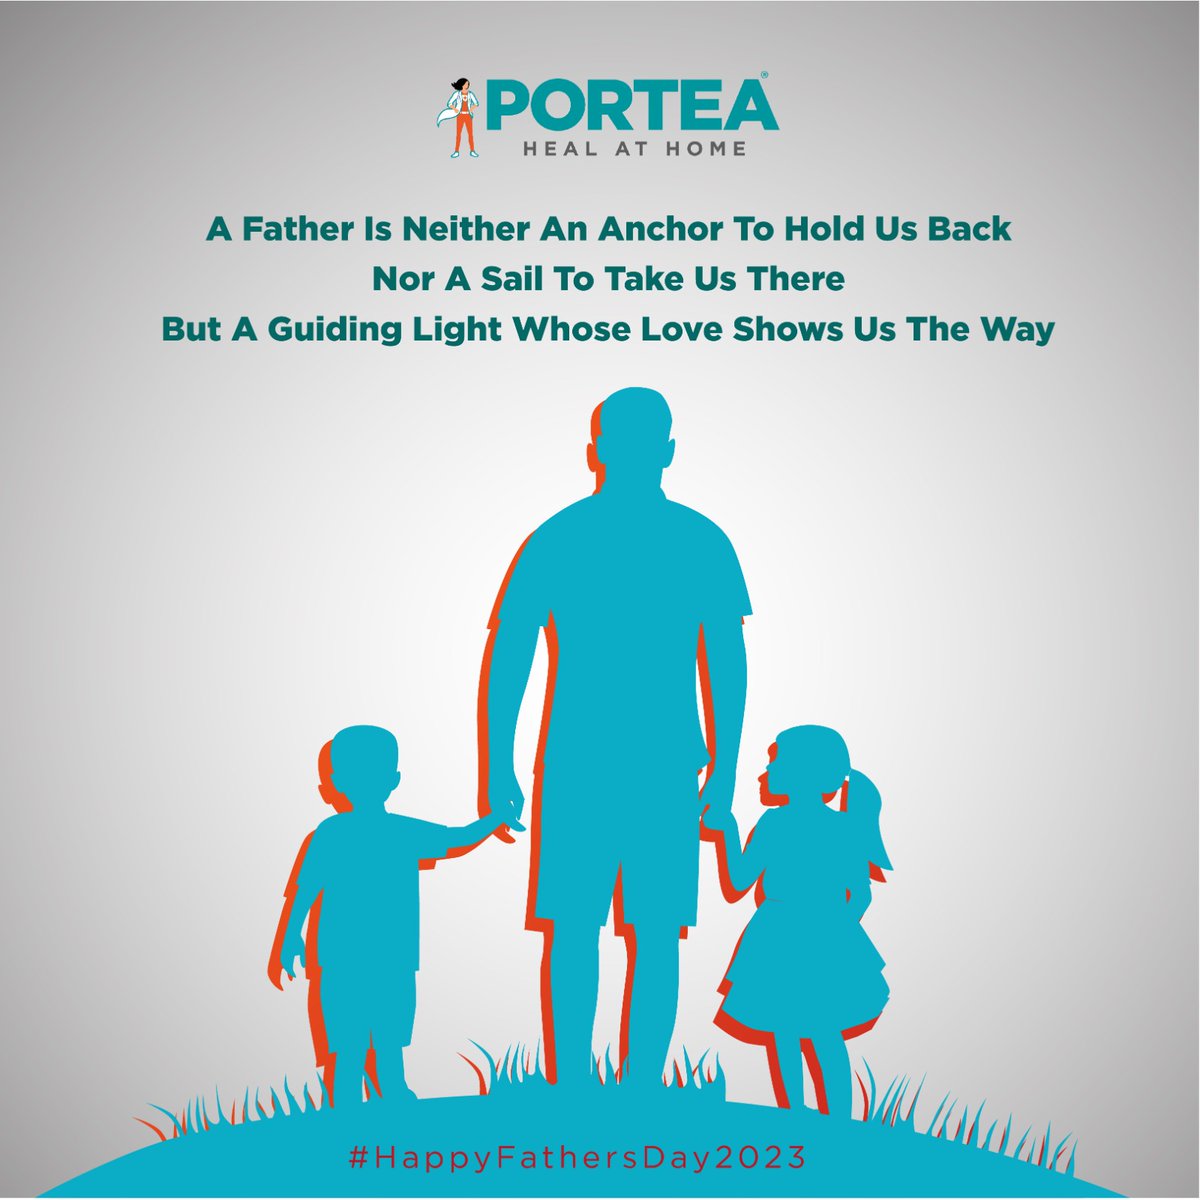 'No matter how tall you become, your father will always be the one you look up to.'

#happyfathersday2023

#father #fathersday #fatherlove #fatherdaughter #fatherandson #fathergod #fatherhood #portea #health #healthcare #homehealthcare #healathome #chiron #chironcares